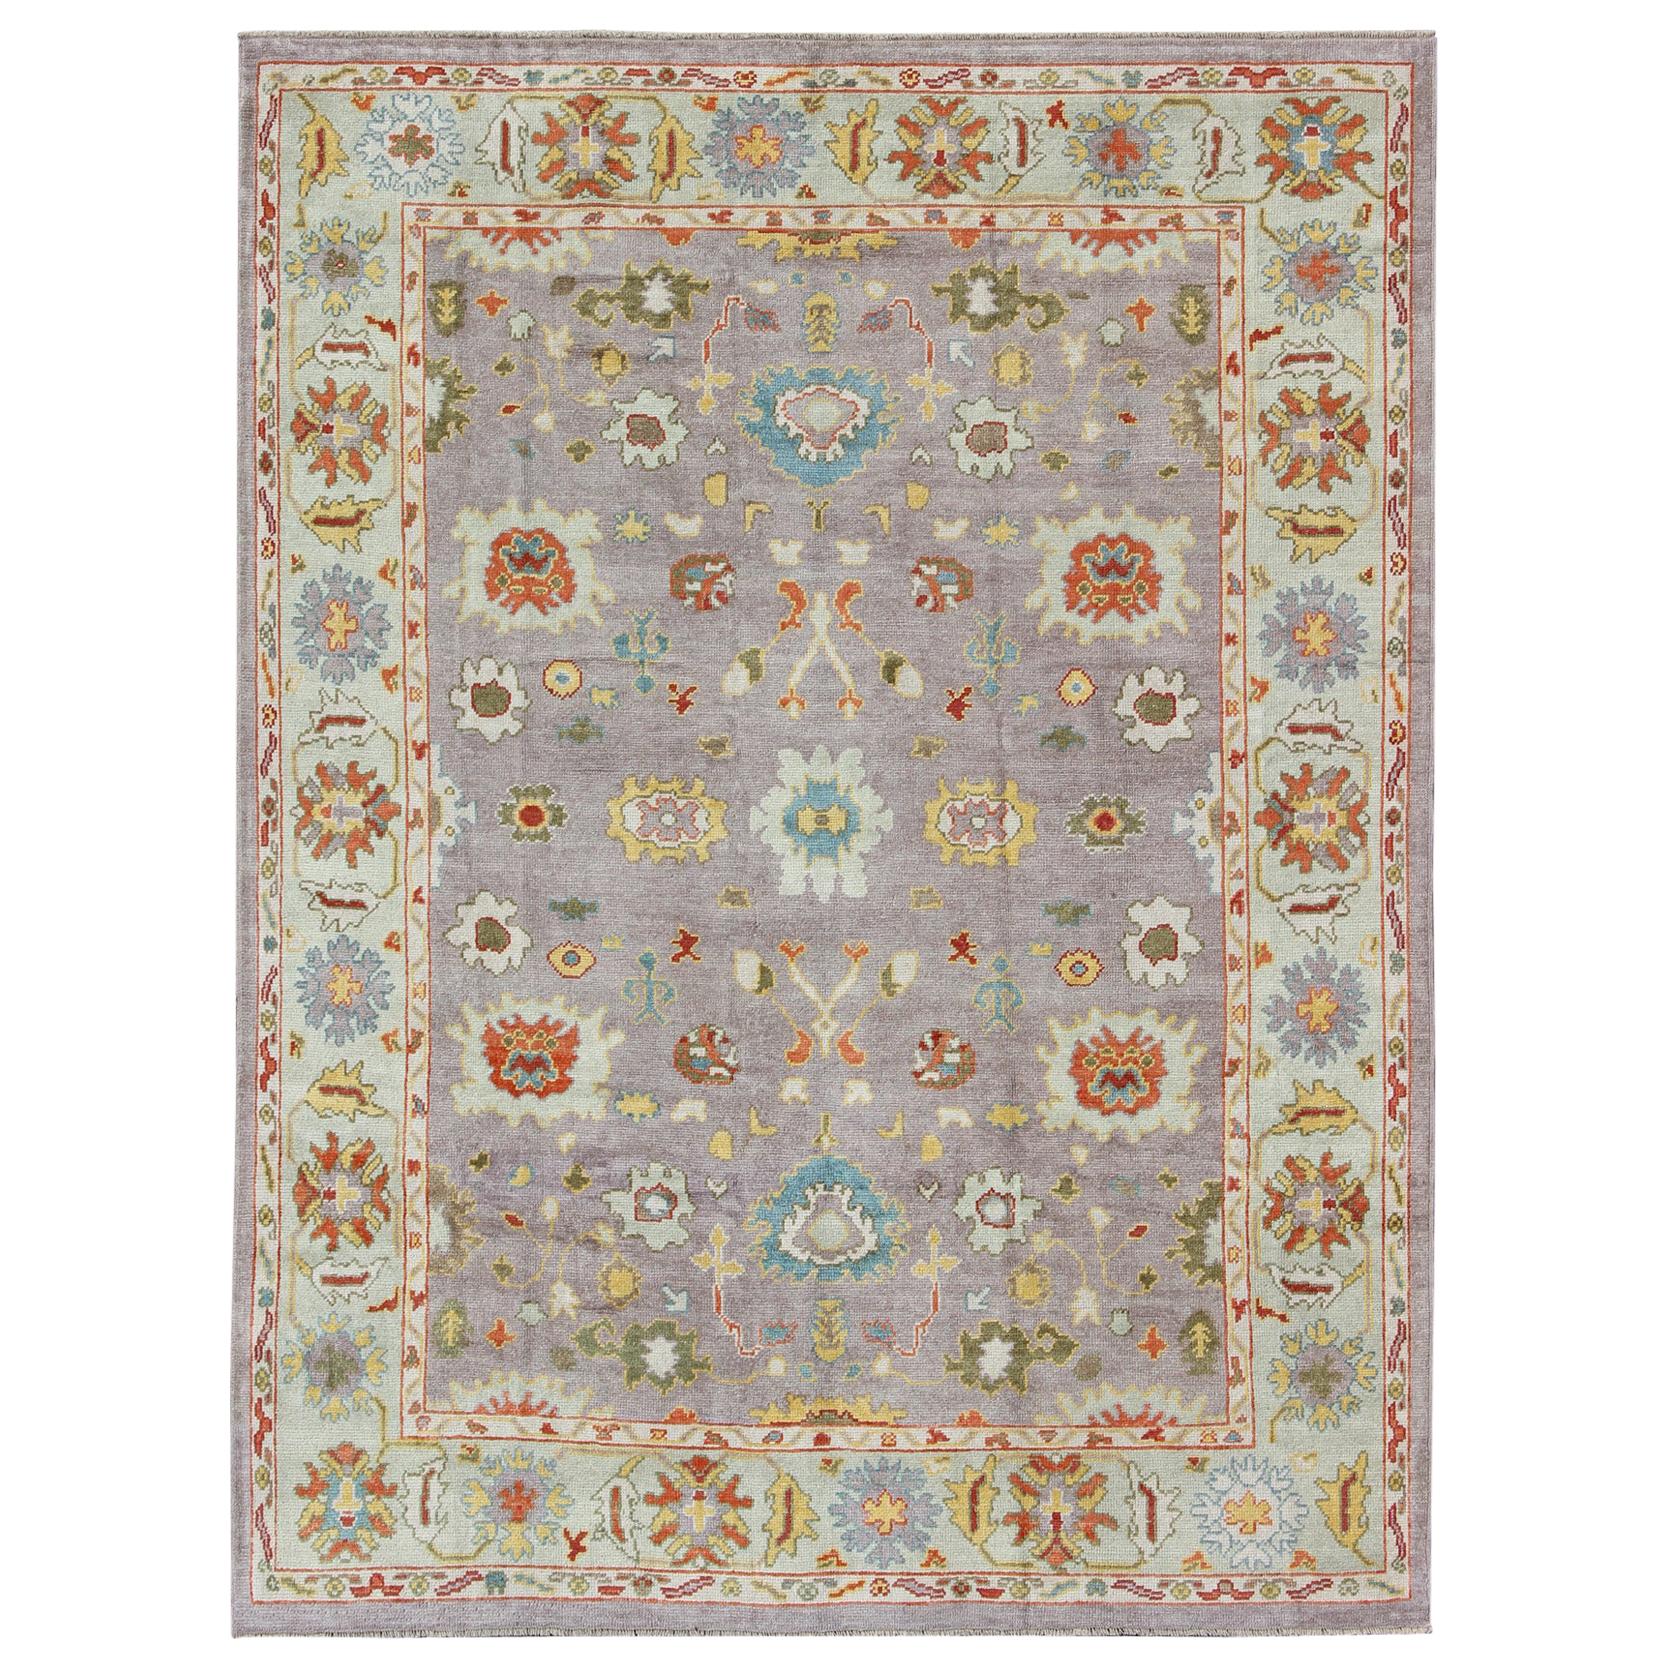 Colorful Turkish Oushak Rug with All-Over Flower Design in Lavender, Light Green